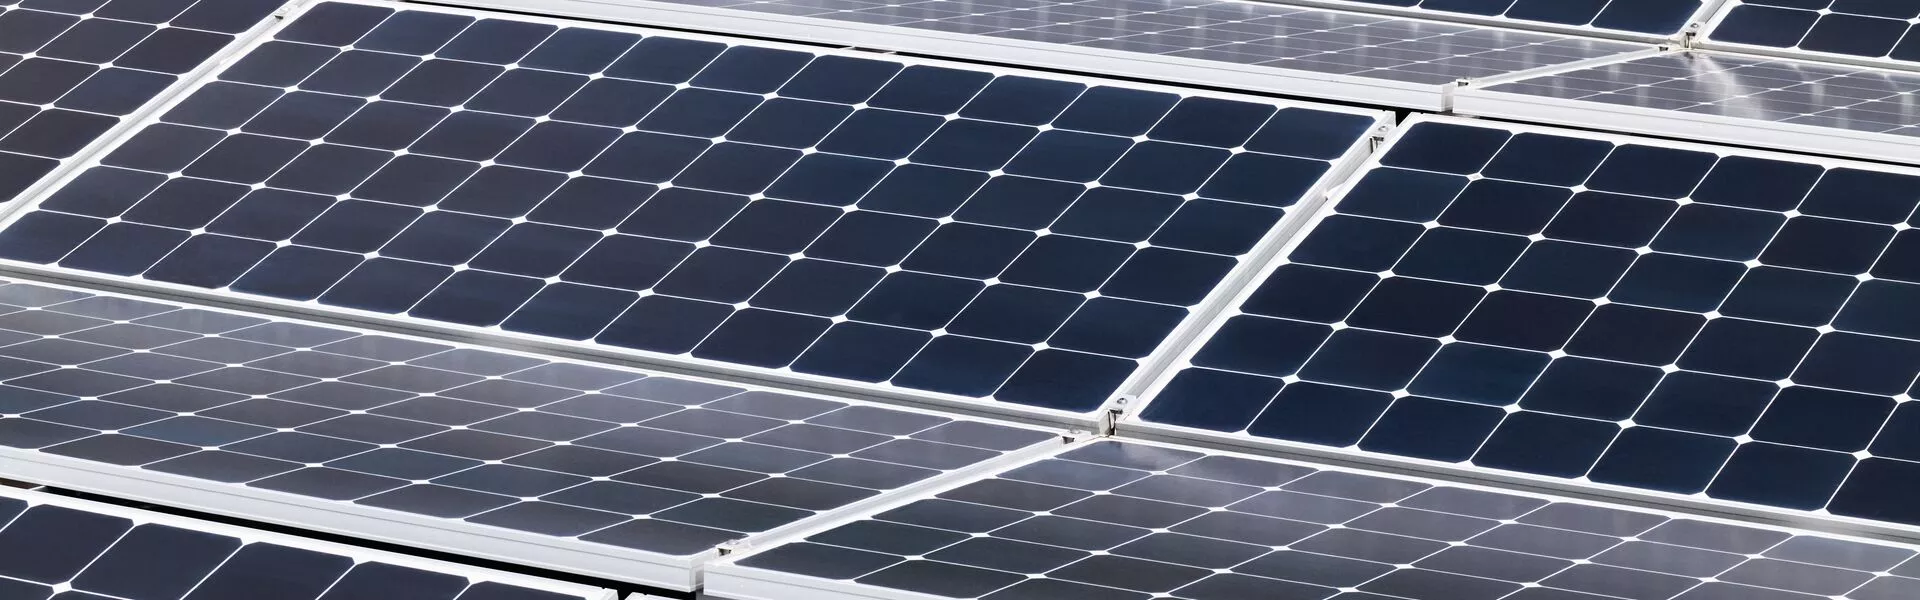 Clean energy starts with sustainable solar panel design 